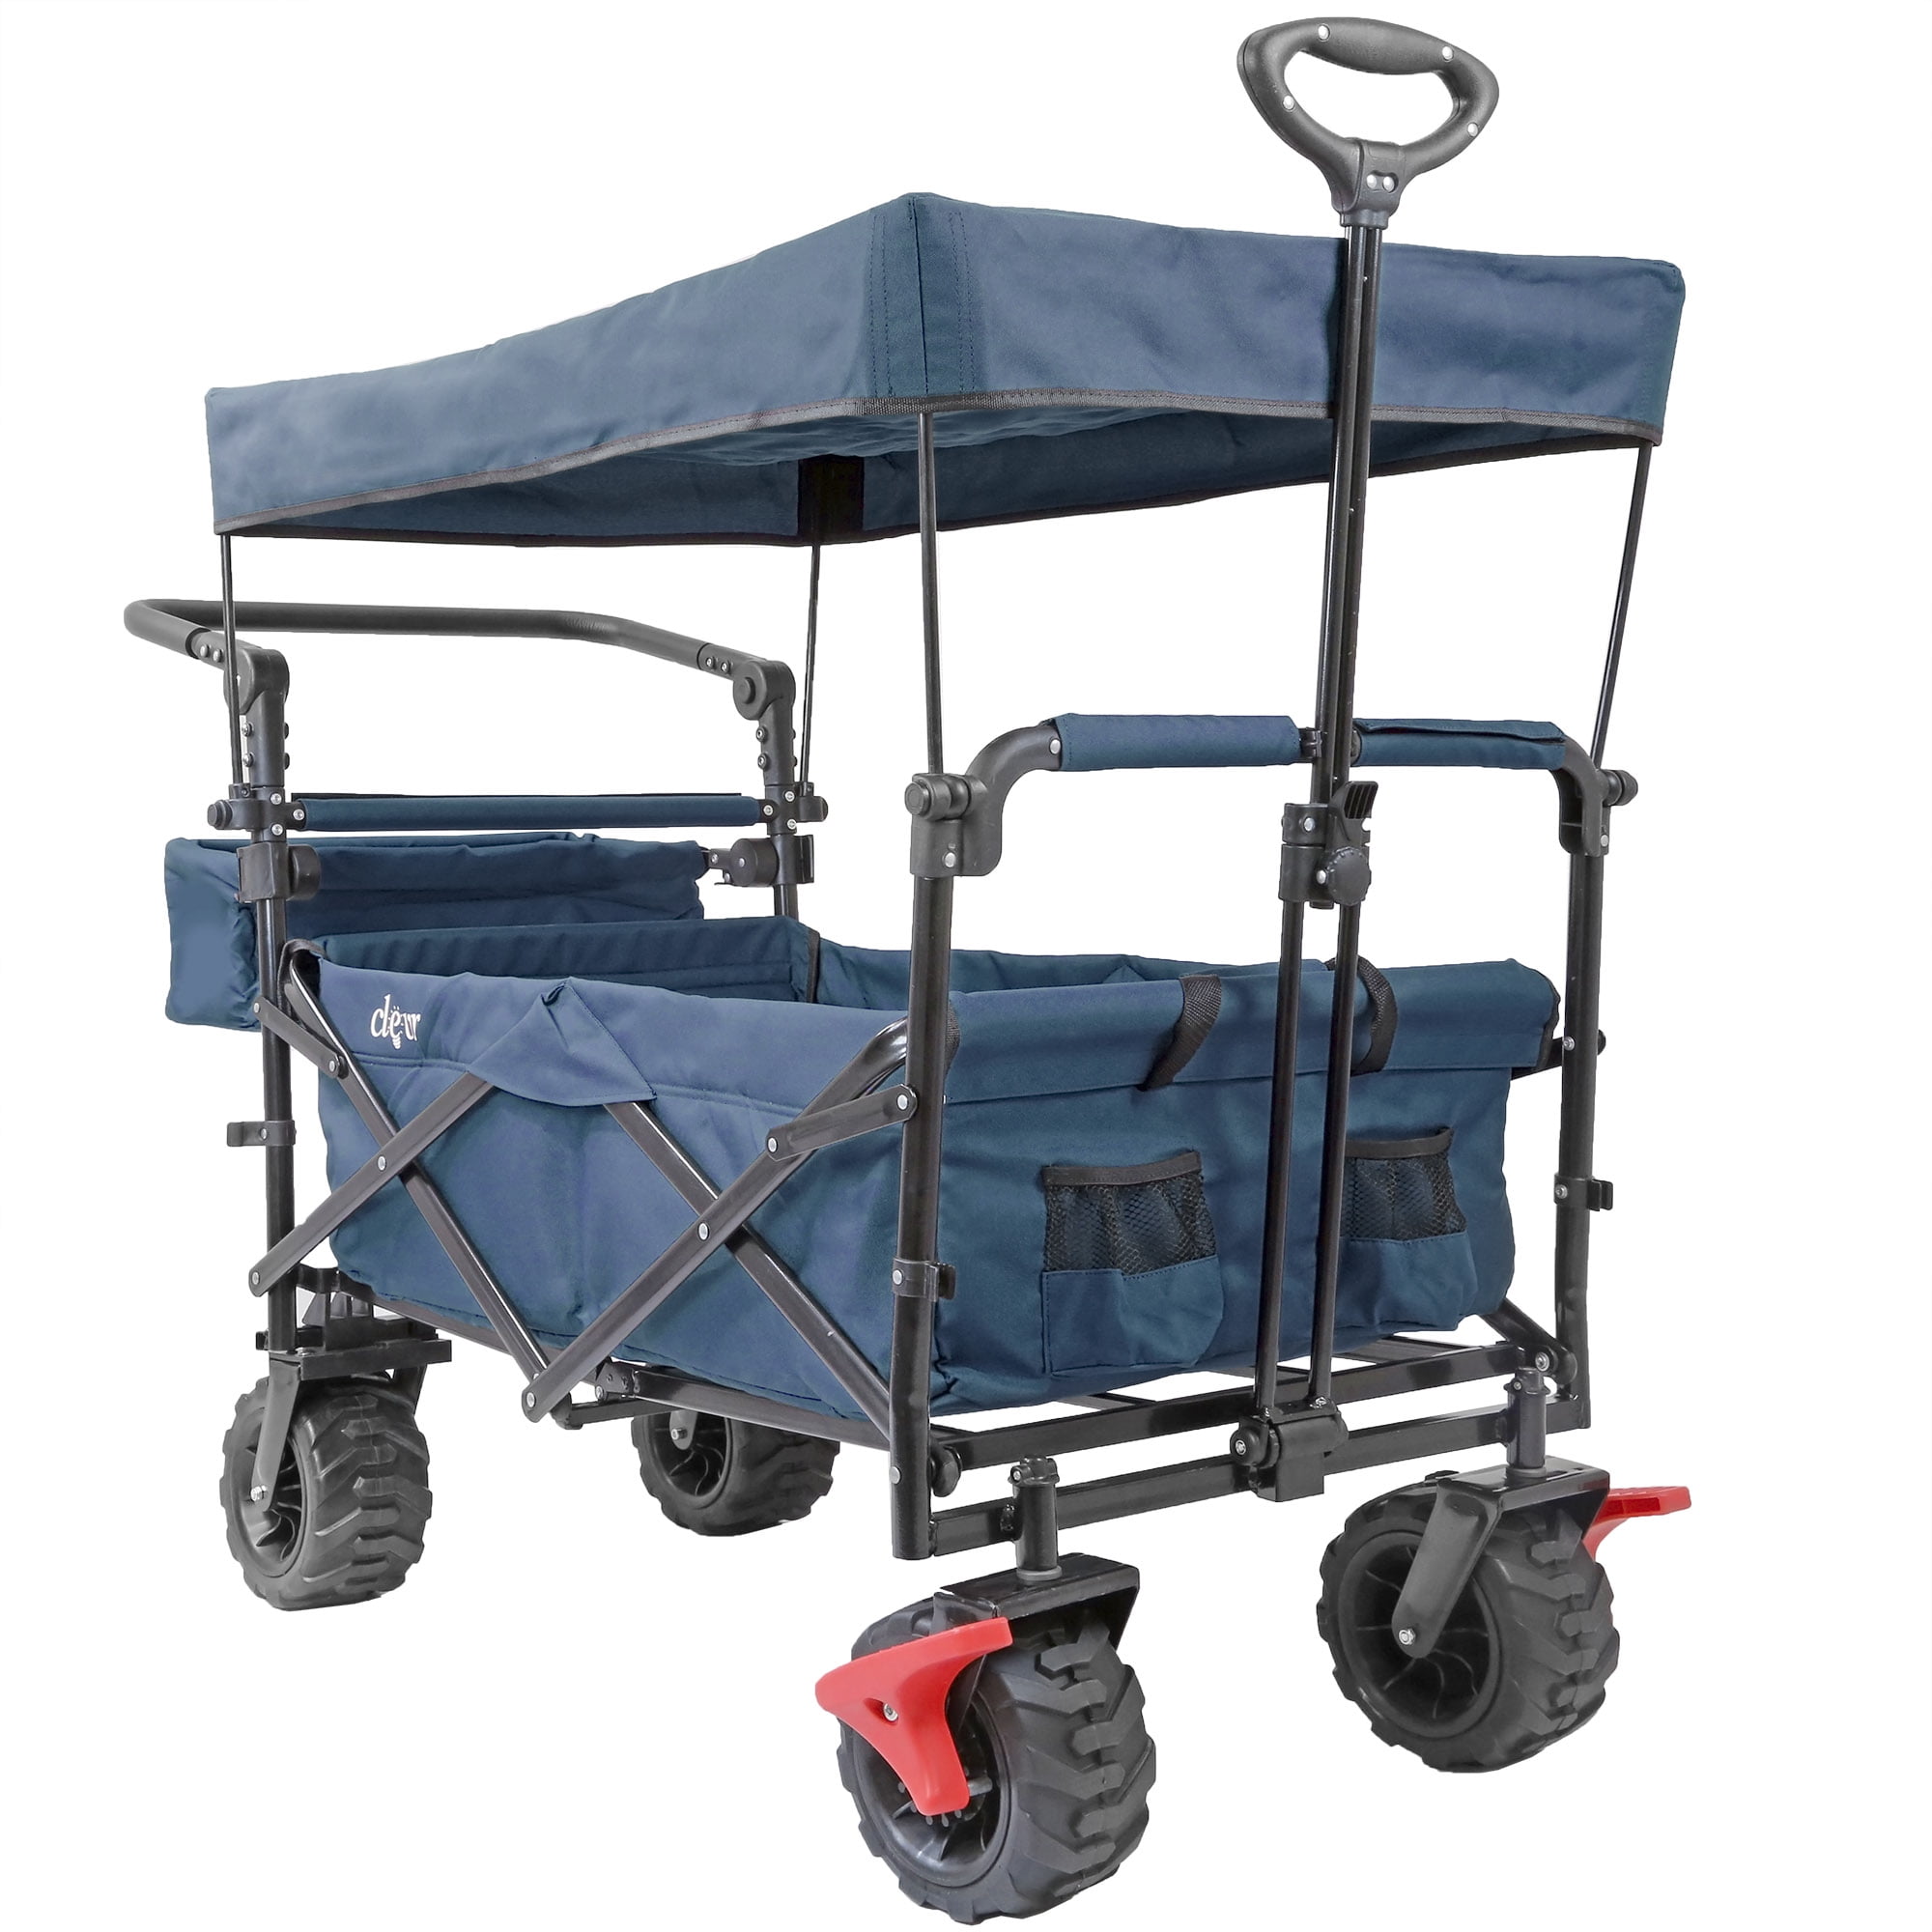 Great for Beach Sports Park Blue 265 Lb Capacity Extra Large Foldable Outdoor Wagon Cart with All Terrain Wheels and Canopy Parties Easy Folding Collapsible Utility Garden Transport Trolley 